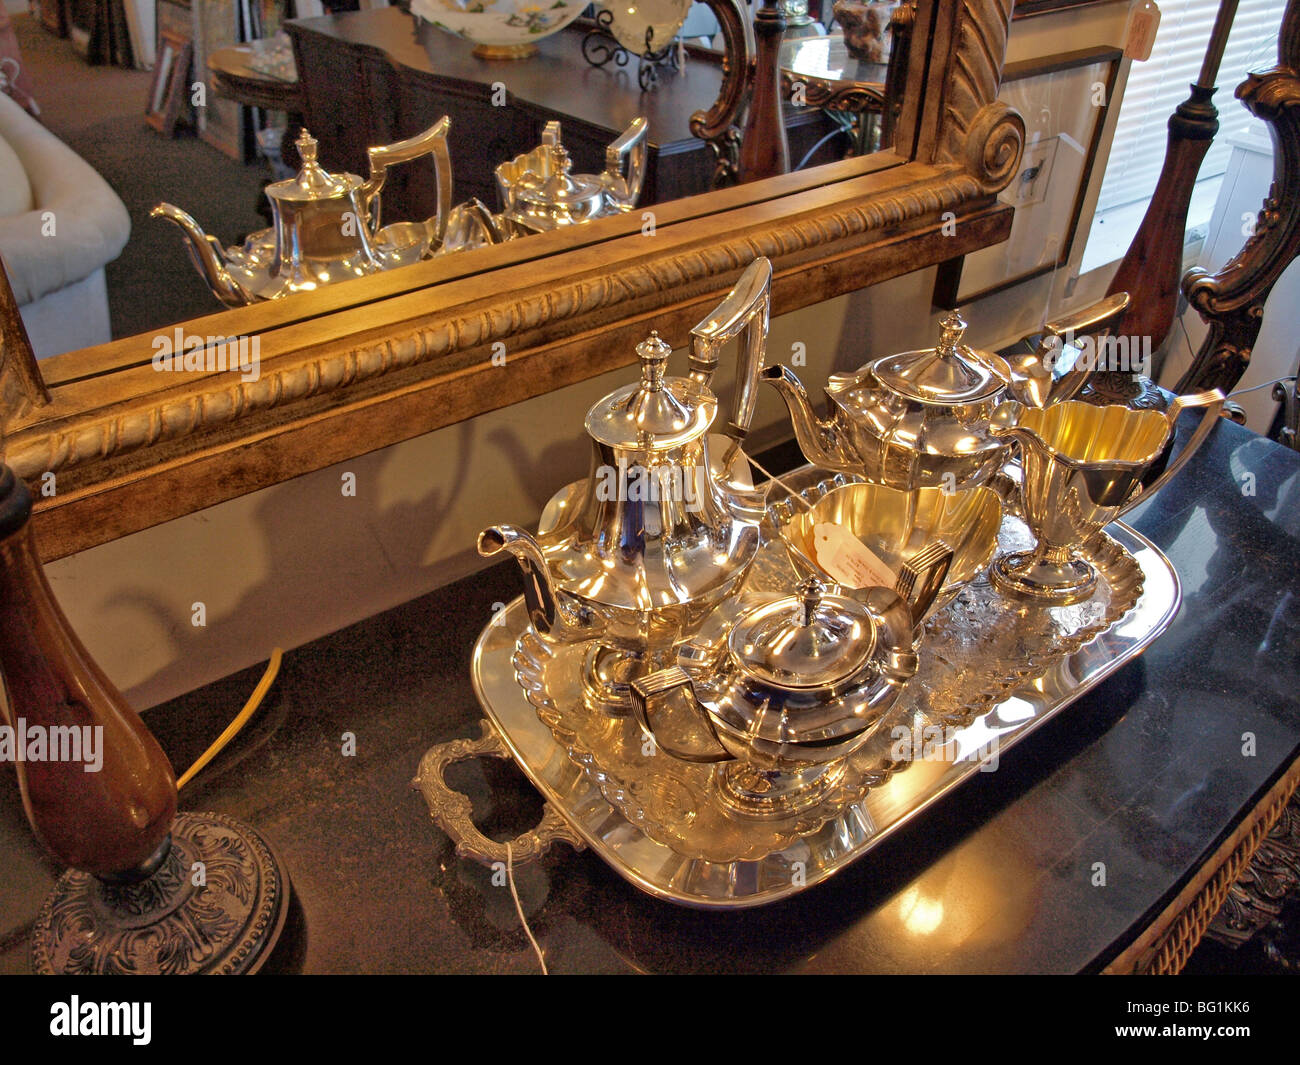 silver tea service set with pitcher pitchers teapots and tray and sugar bowl all is sitting on a counter with some mirror images Stock Photo